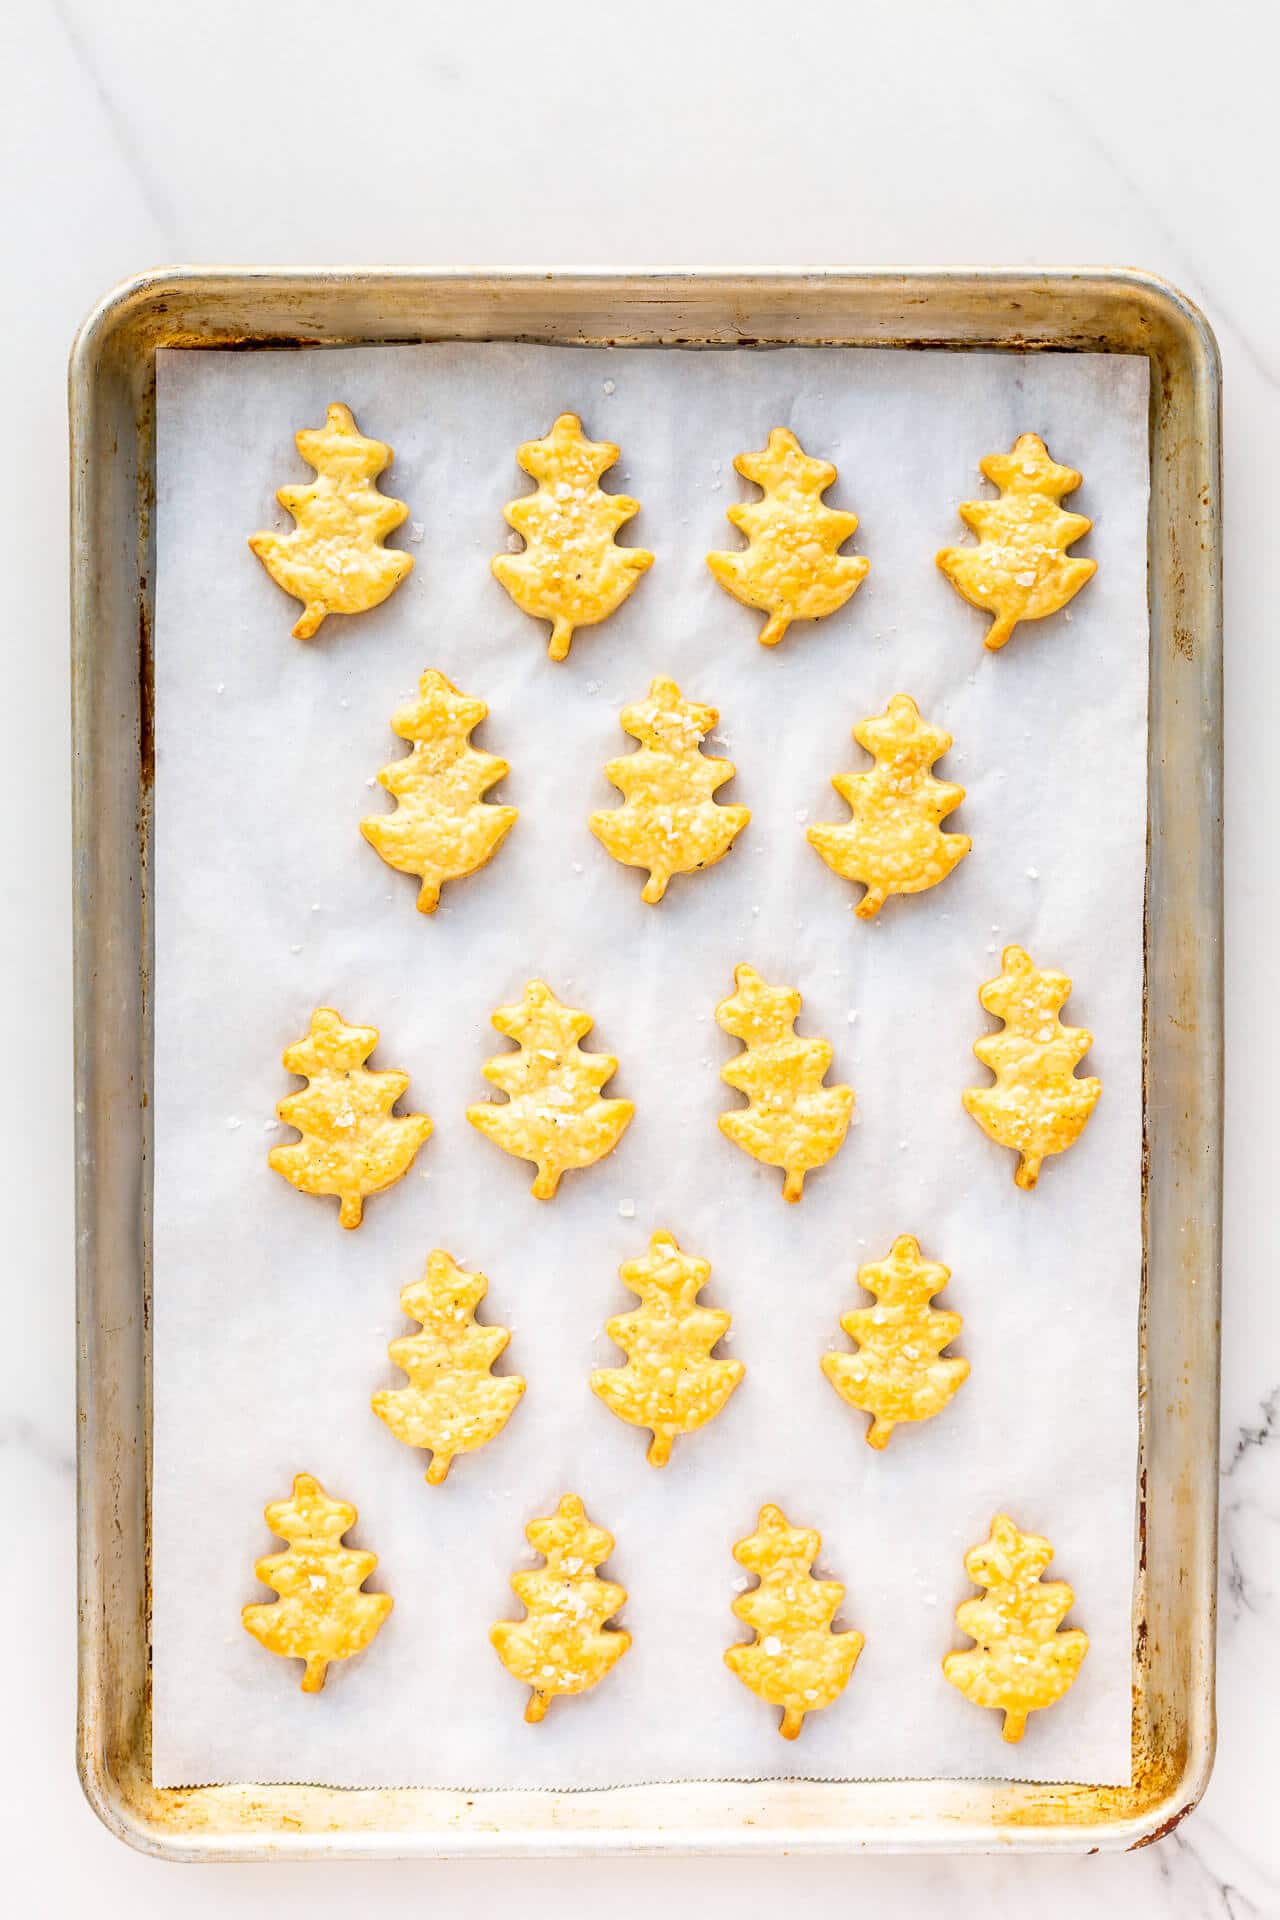 Freshly baked cheese shortbread cookies shaped like oak leaves on a parchment-lined baking sheet